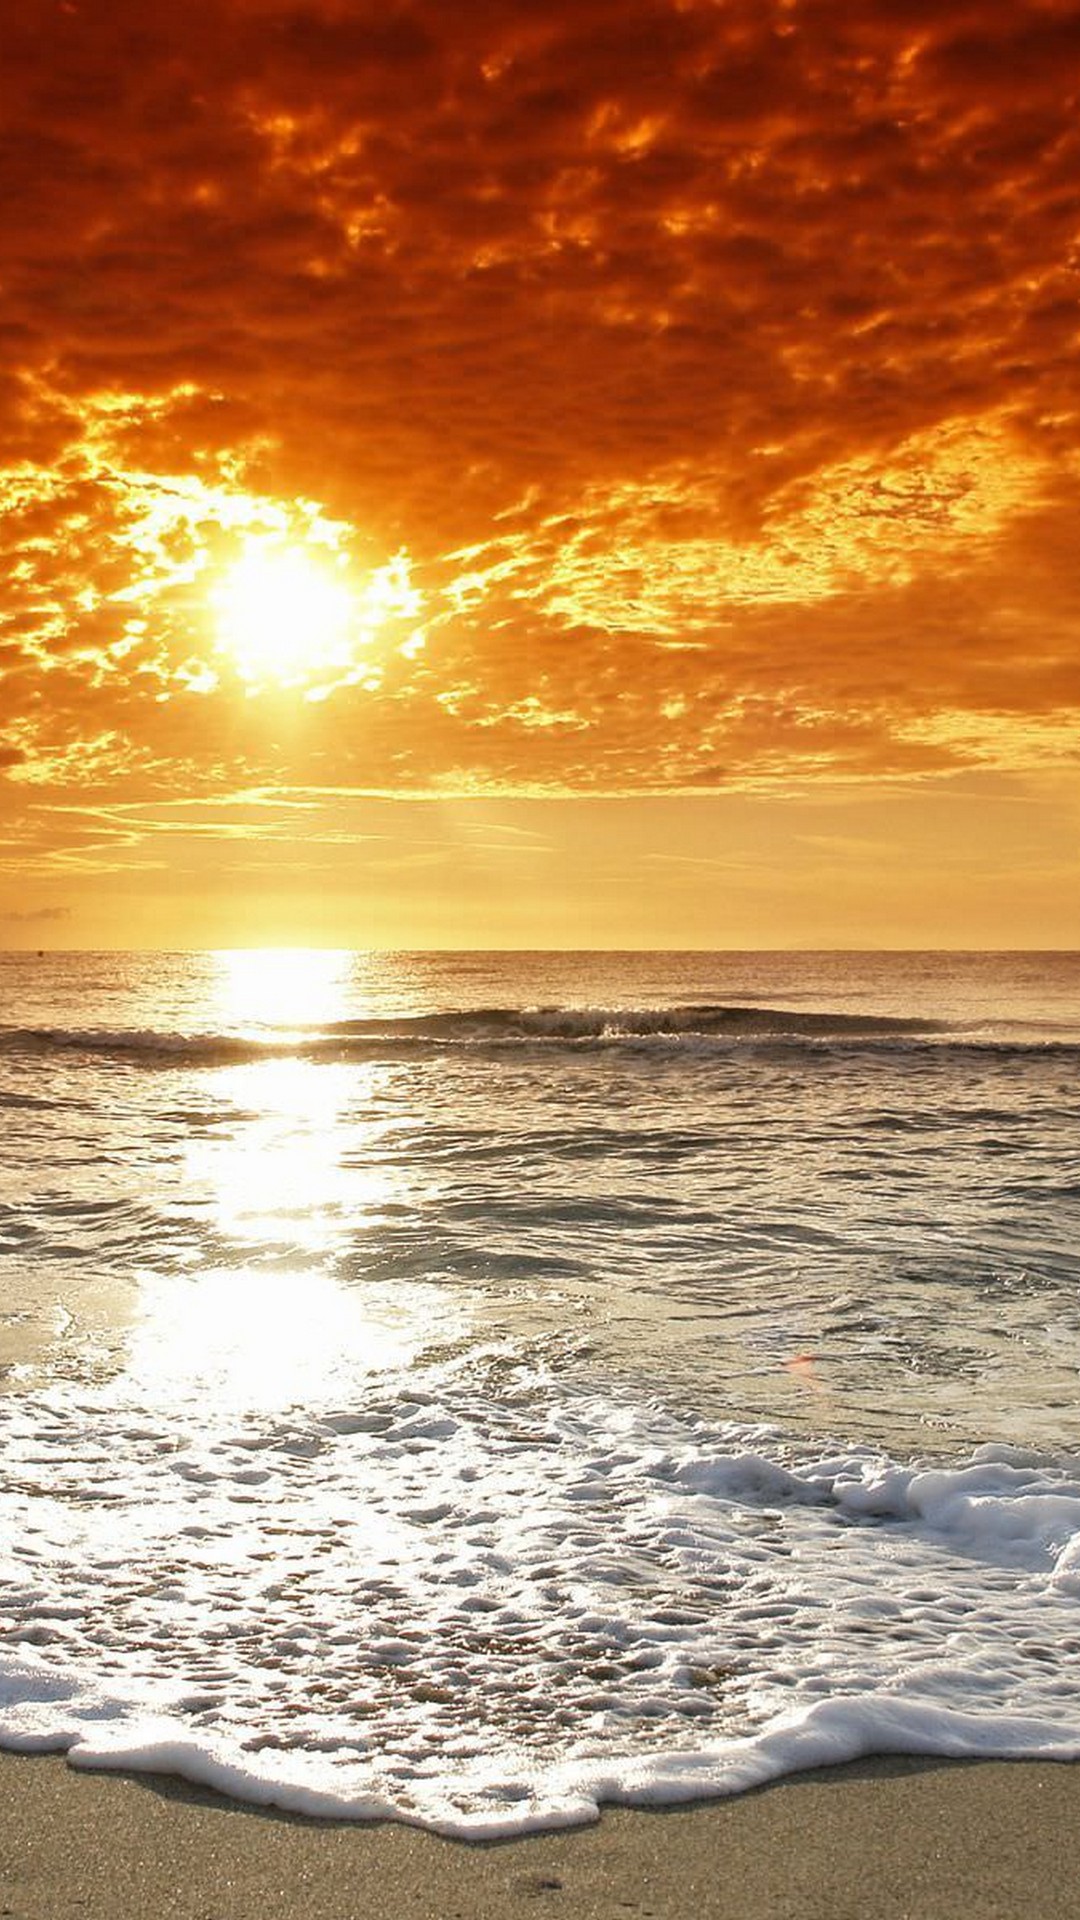 Sunset iPhone 7 Wallpaper with high-resolution 1080x1920 pixel. You can use this wallpaper for your iPhone 5, 6, 7, 8, X, XS, XR backgrounds, Mobile Screensaver, or iPad Lock Screen